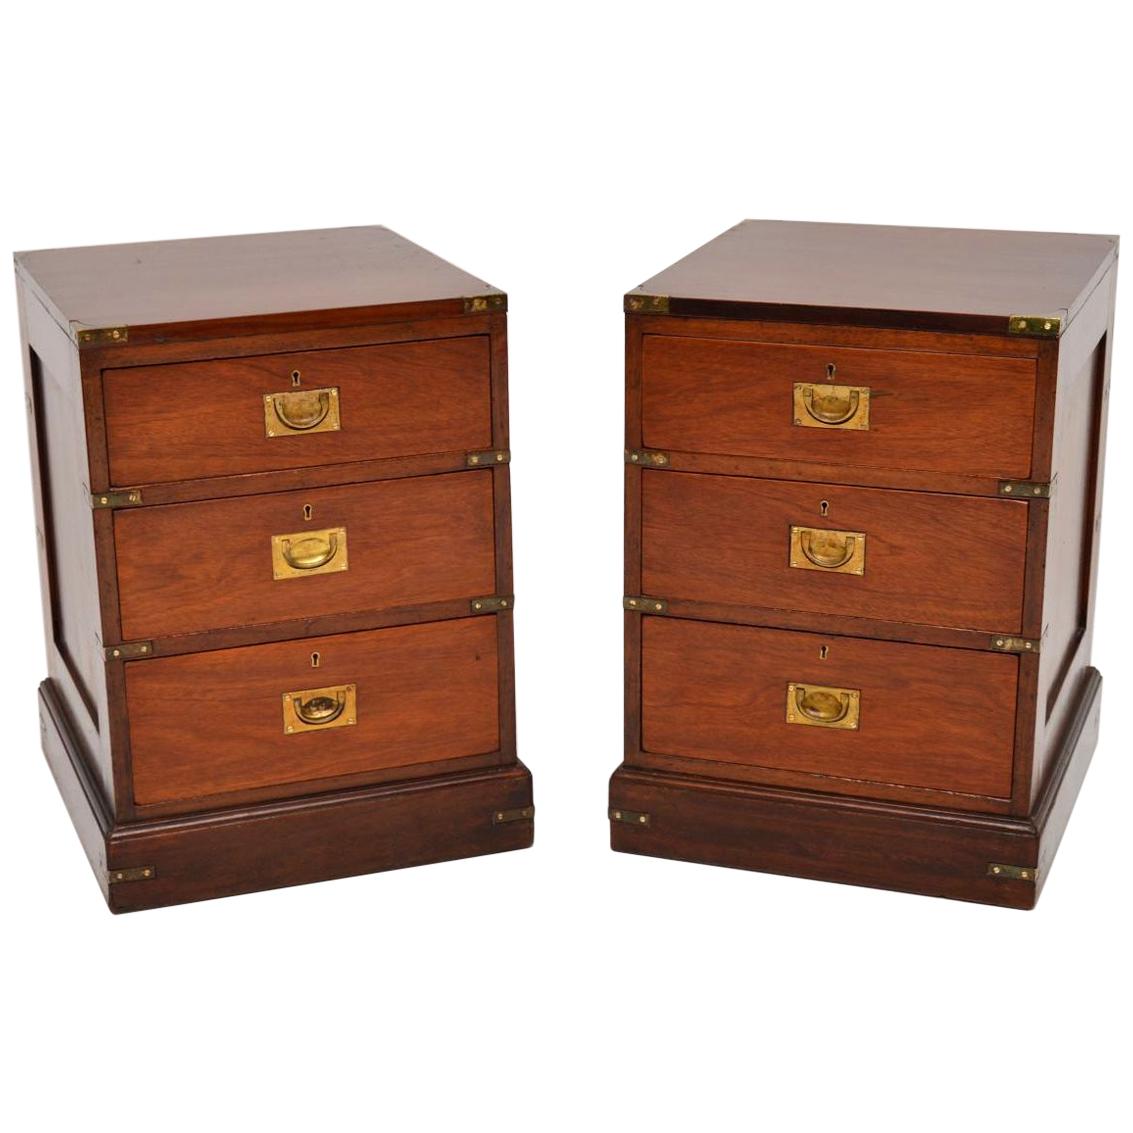 Pair of Antique Mahogany Military Campaign Bedside Chests